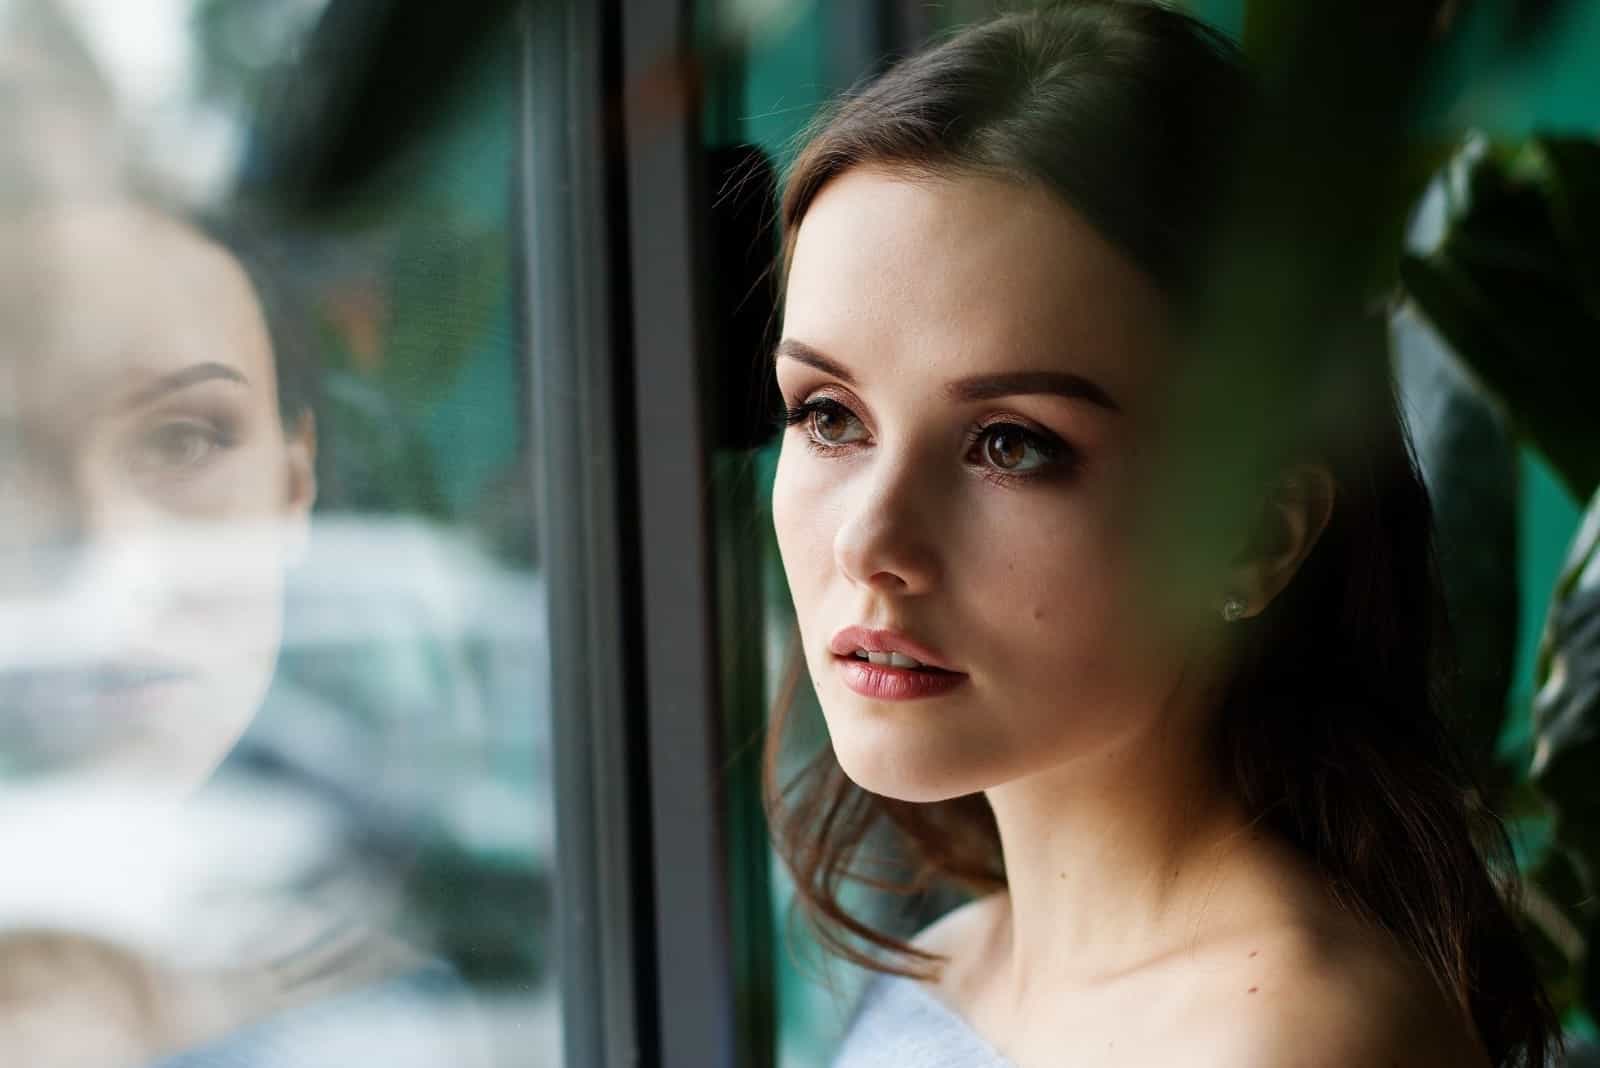 pensive woman standing near window during daytime